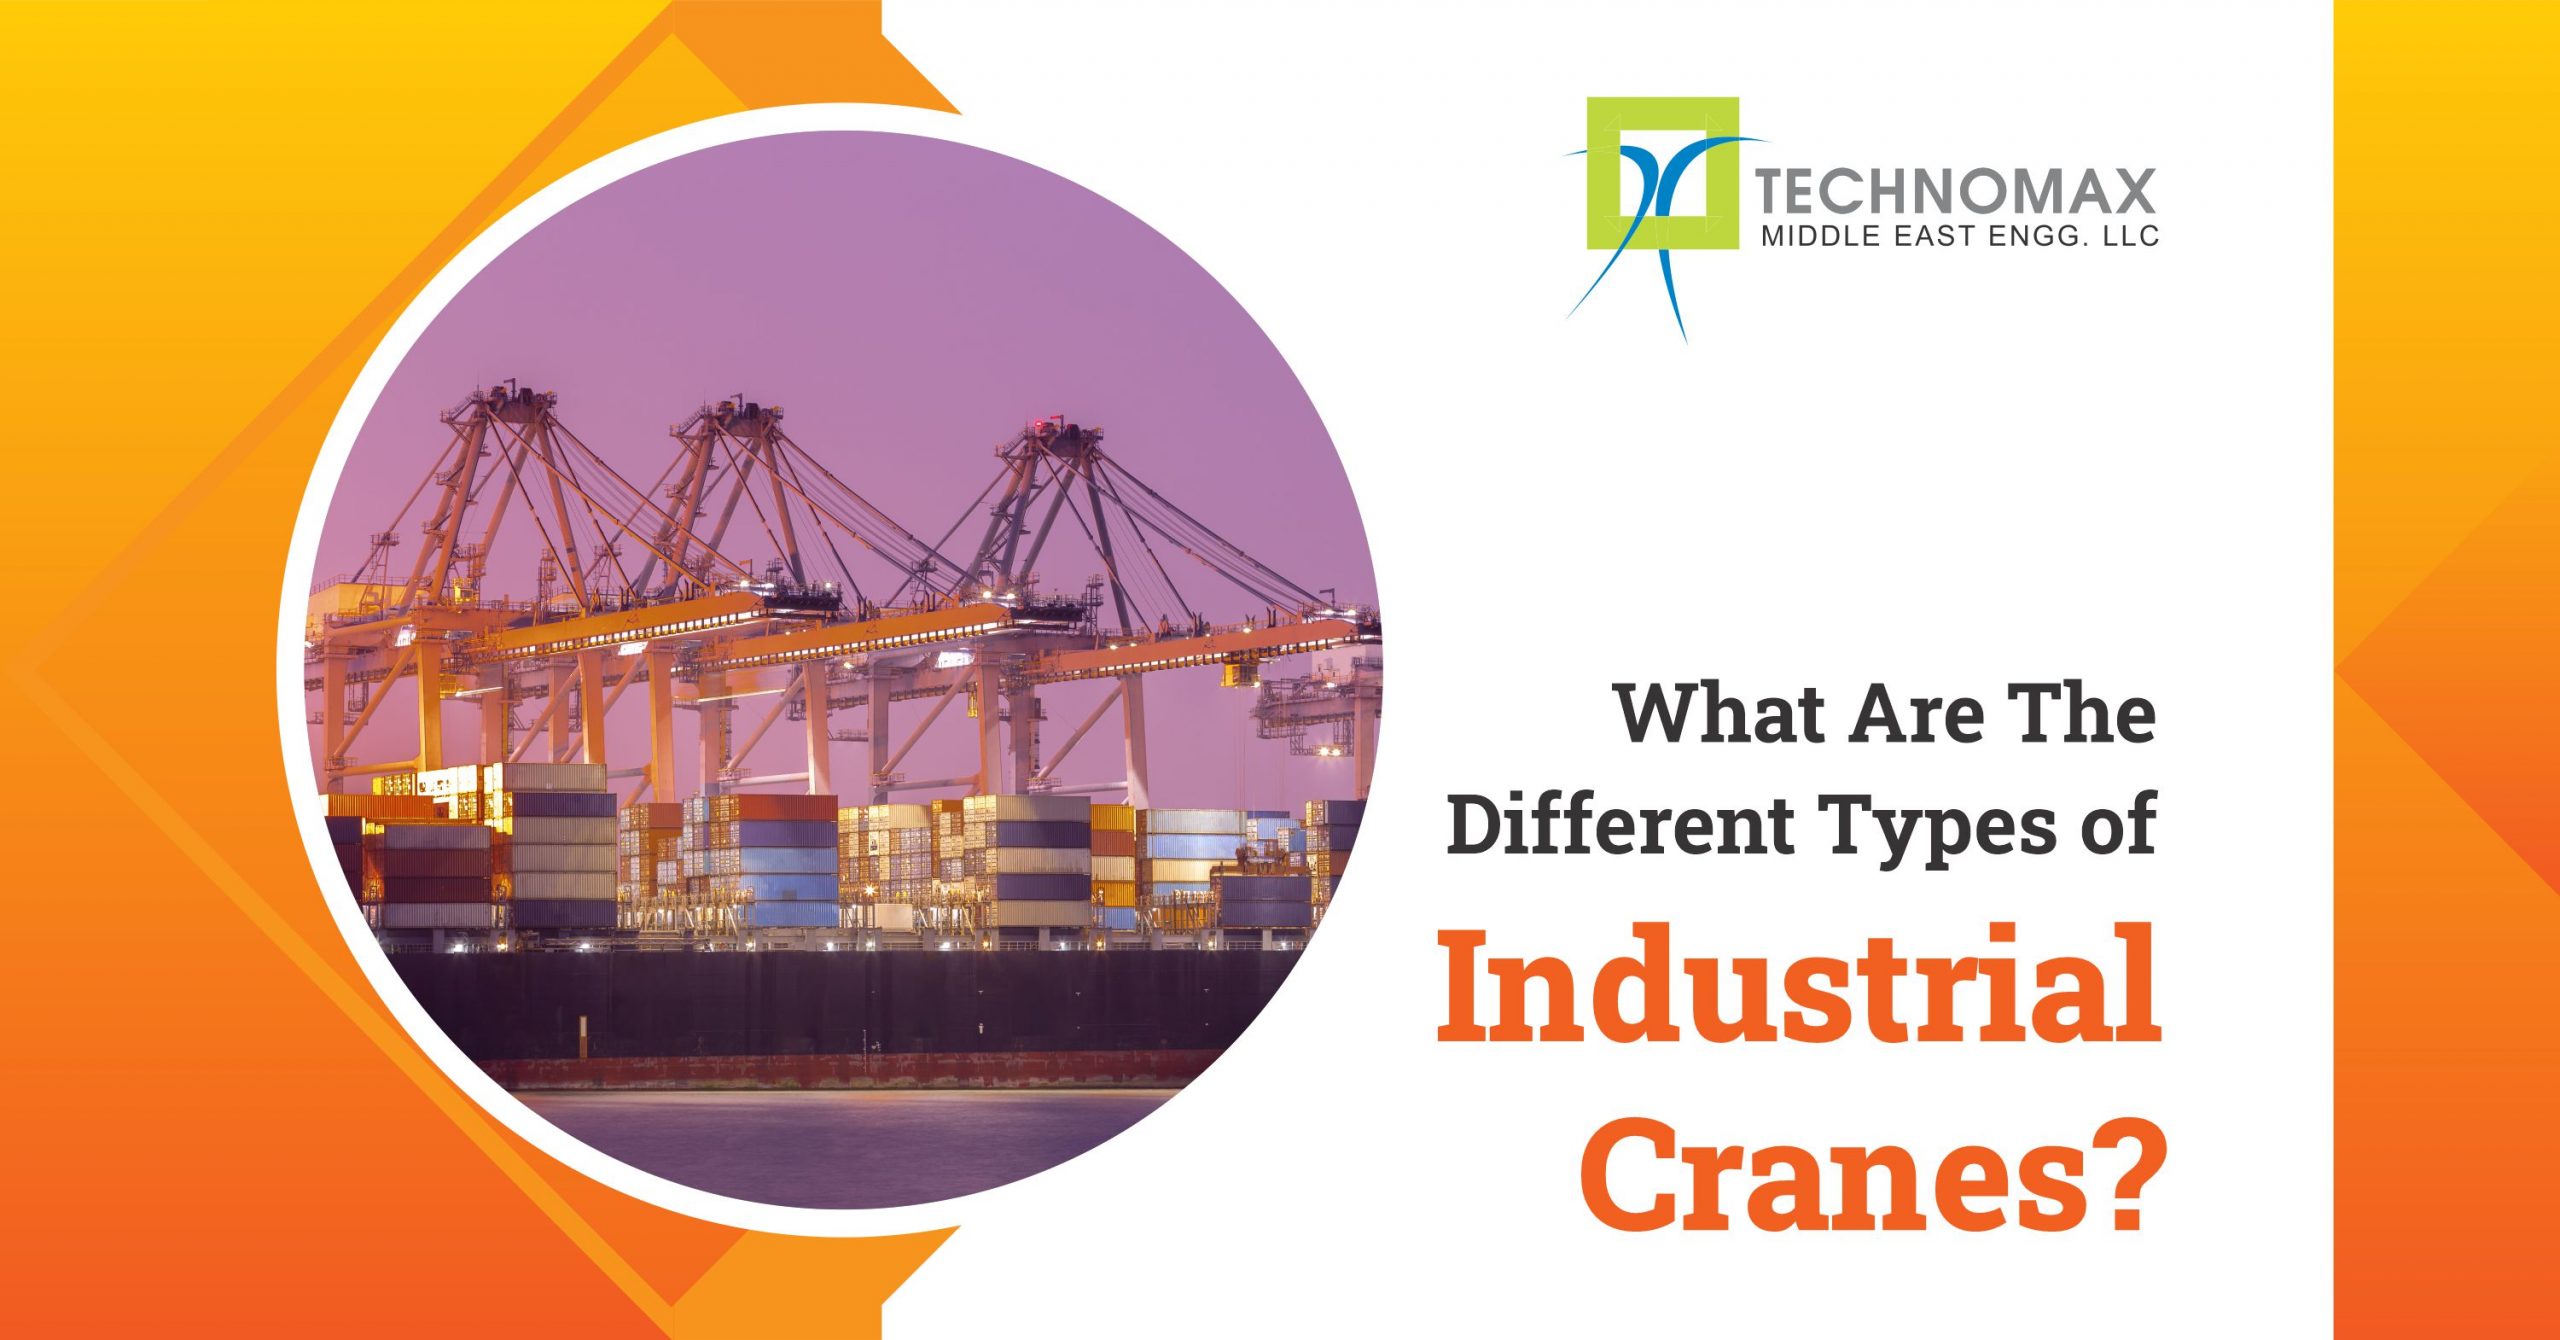 Different Types of Industrial Cranes